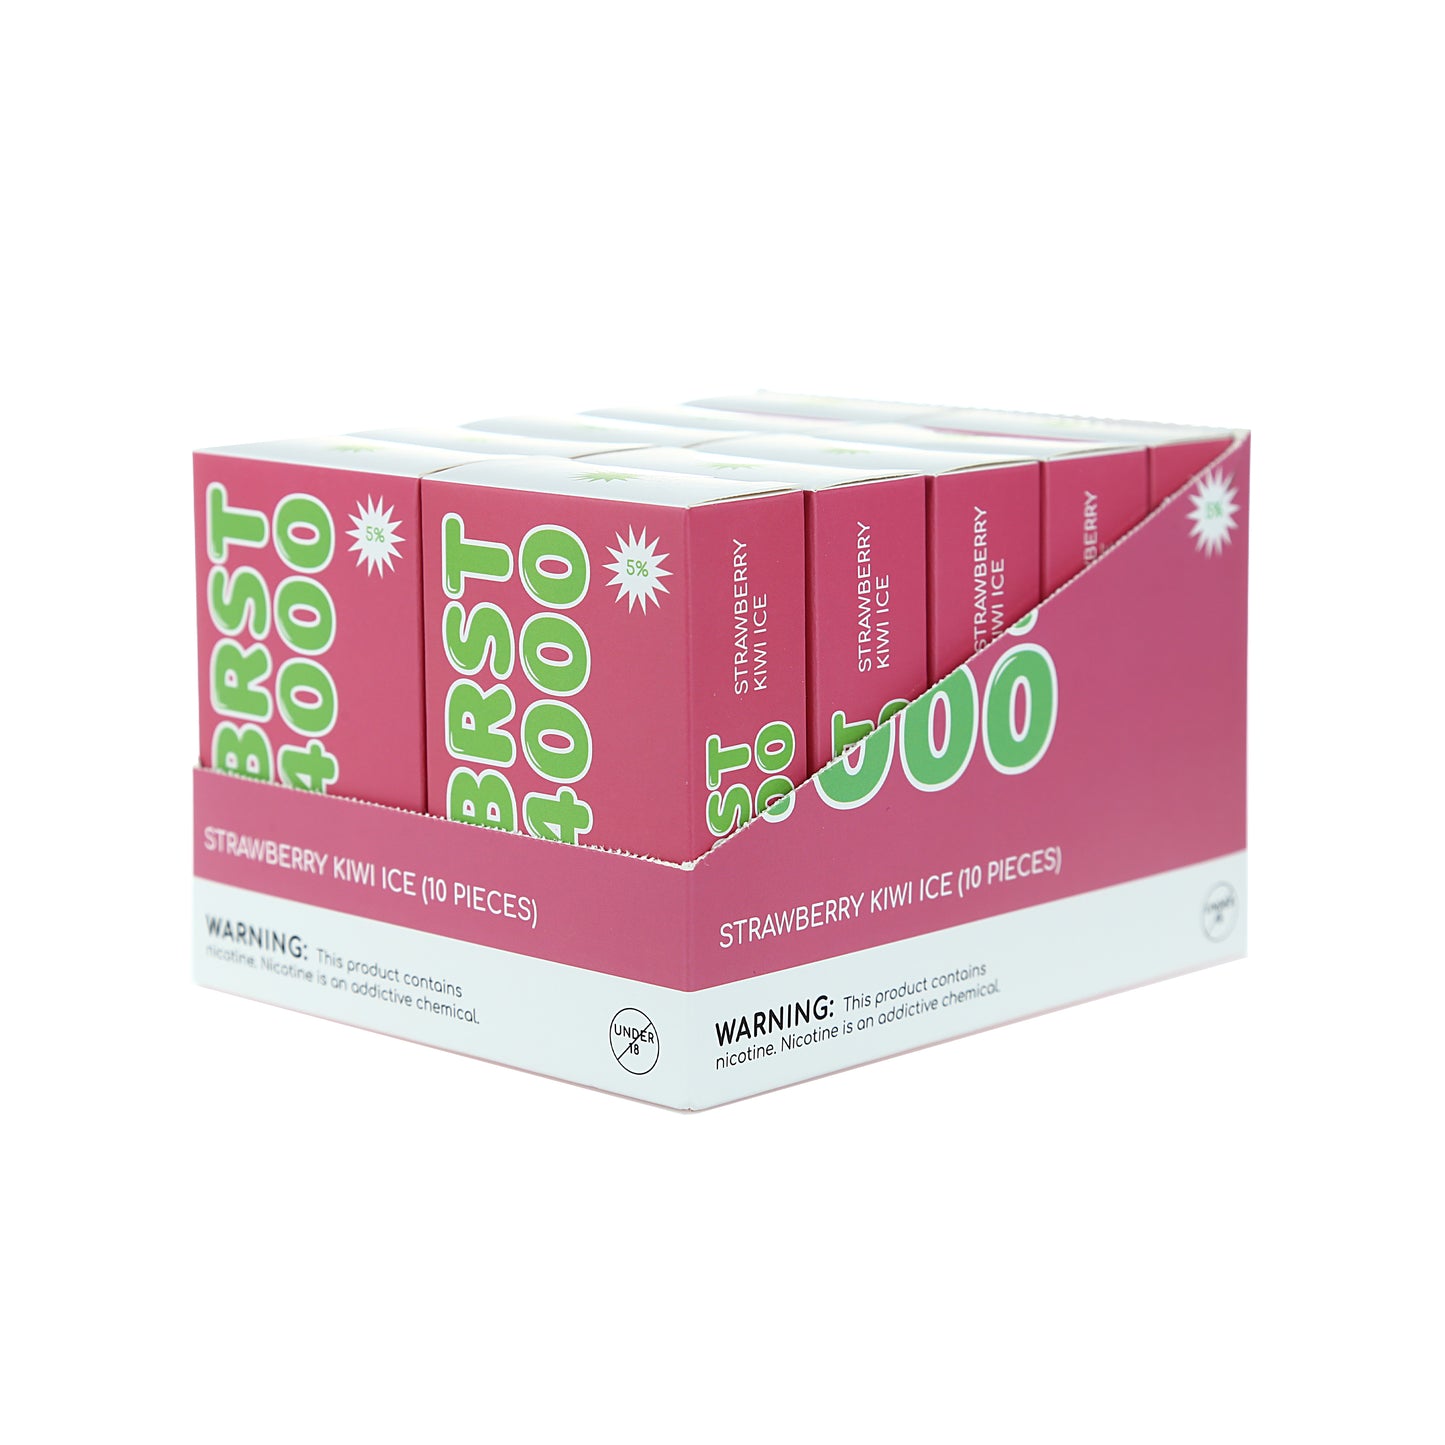 BRST 4000 Box of 10 - Multiple Flavors